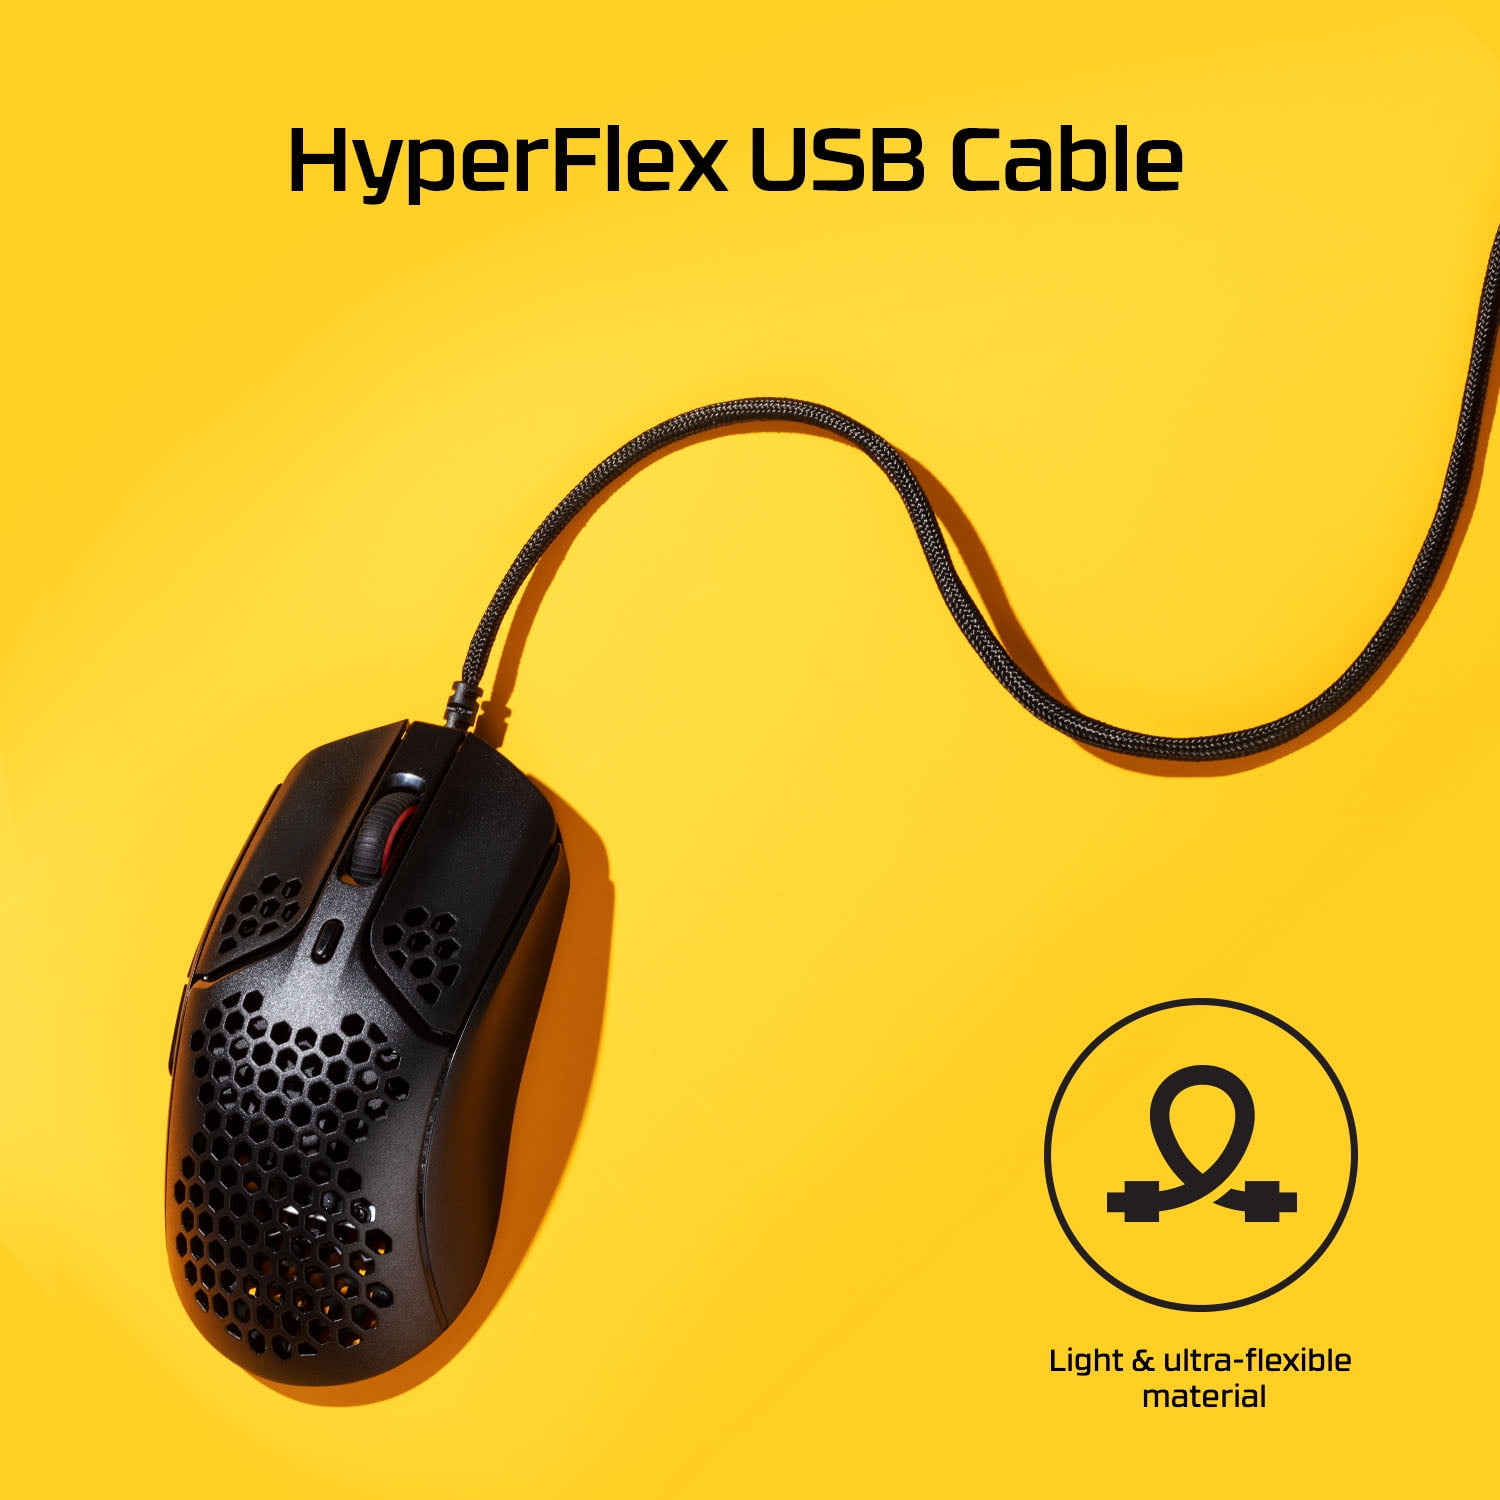 HyperX Pulsefire Haste – Honeycomb 16000 Buttons USB Hex to RGB, Design, Gaming HyperFlex Mouse, Shell, Up 59g, 6 Programmable DPI, Ultra-Lightweight, Cable